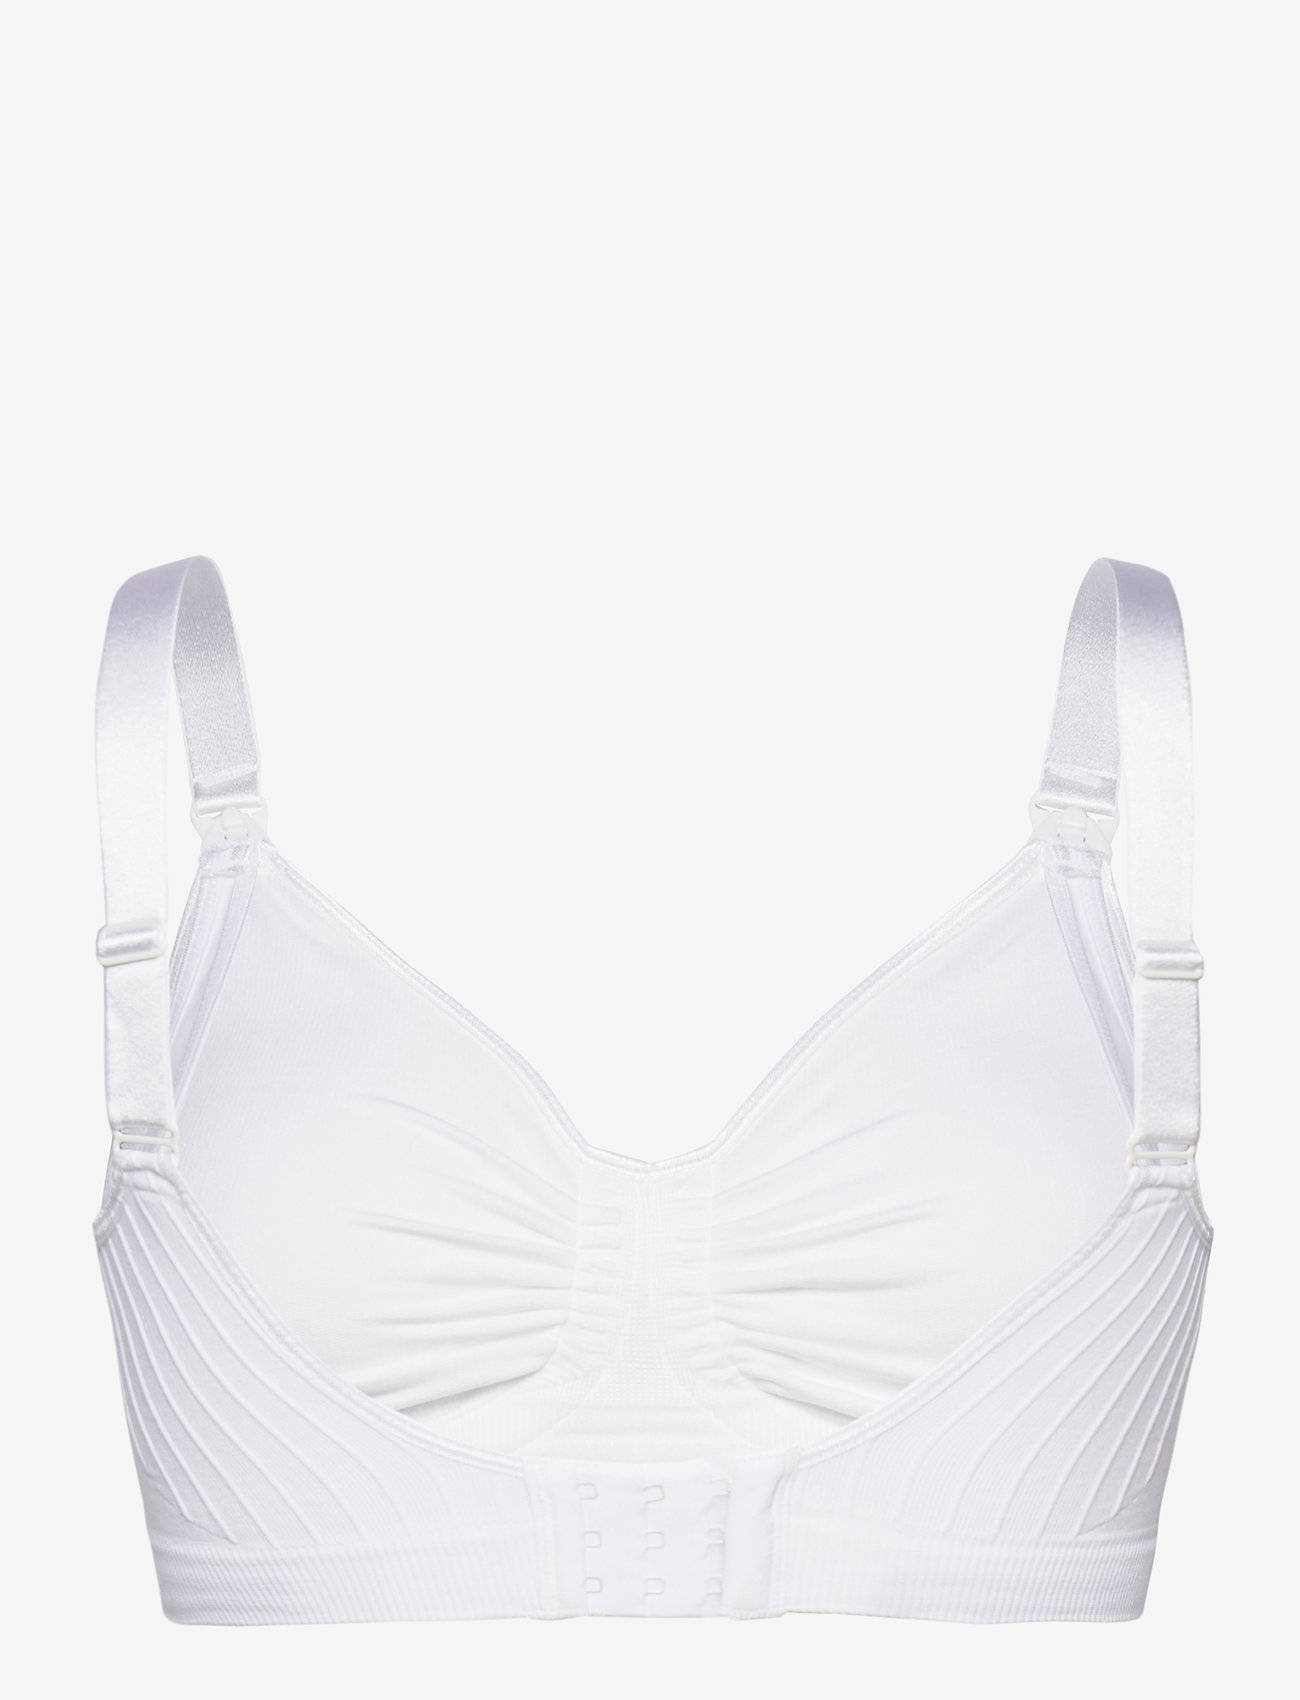 Carriwell - Maternity & Nursing Bra with Carri-Gel support - lowest prices - white - 1